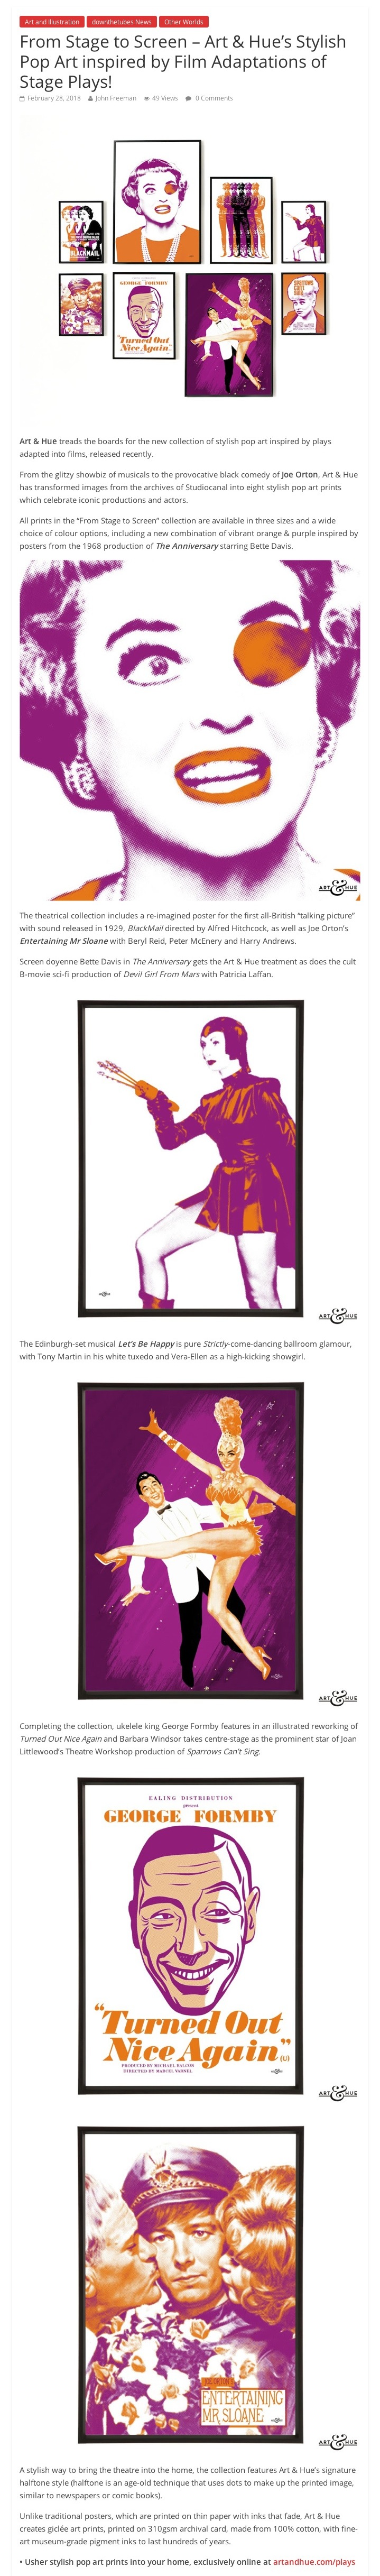 From Stage to Screen – Art & Hue’s Stylish Pop Art inspired by Film Adaptations of Stage Plays! – downthetubes.net